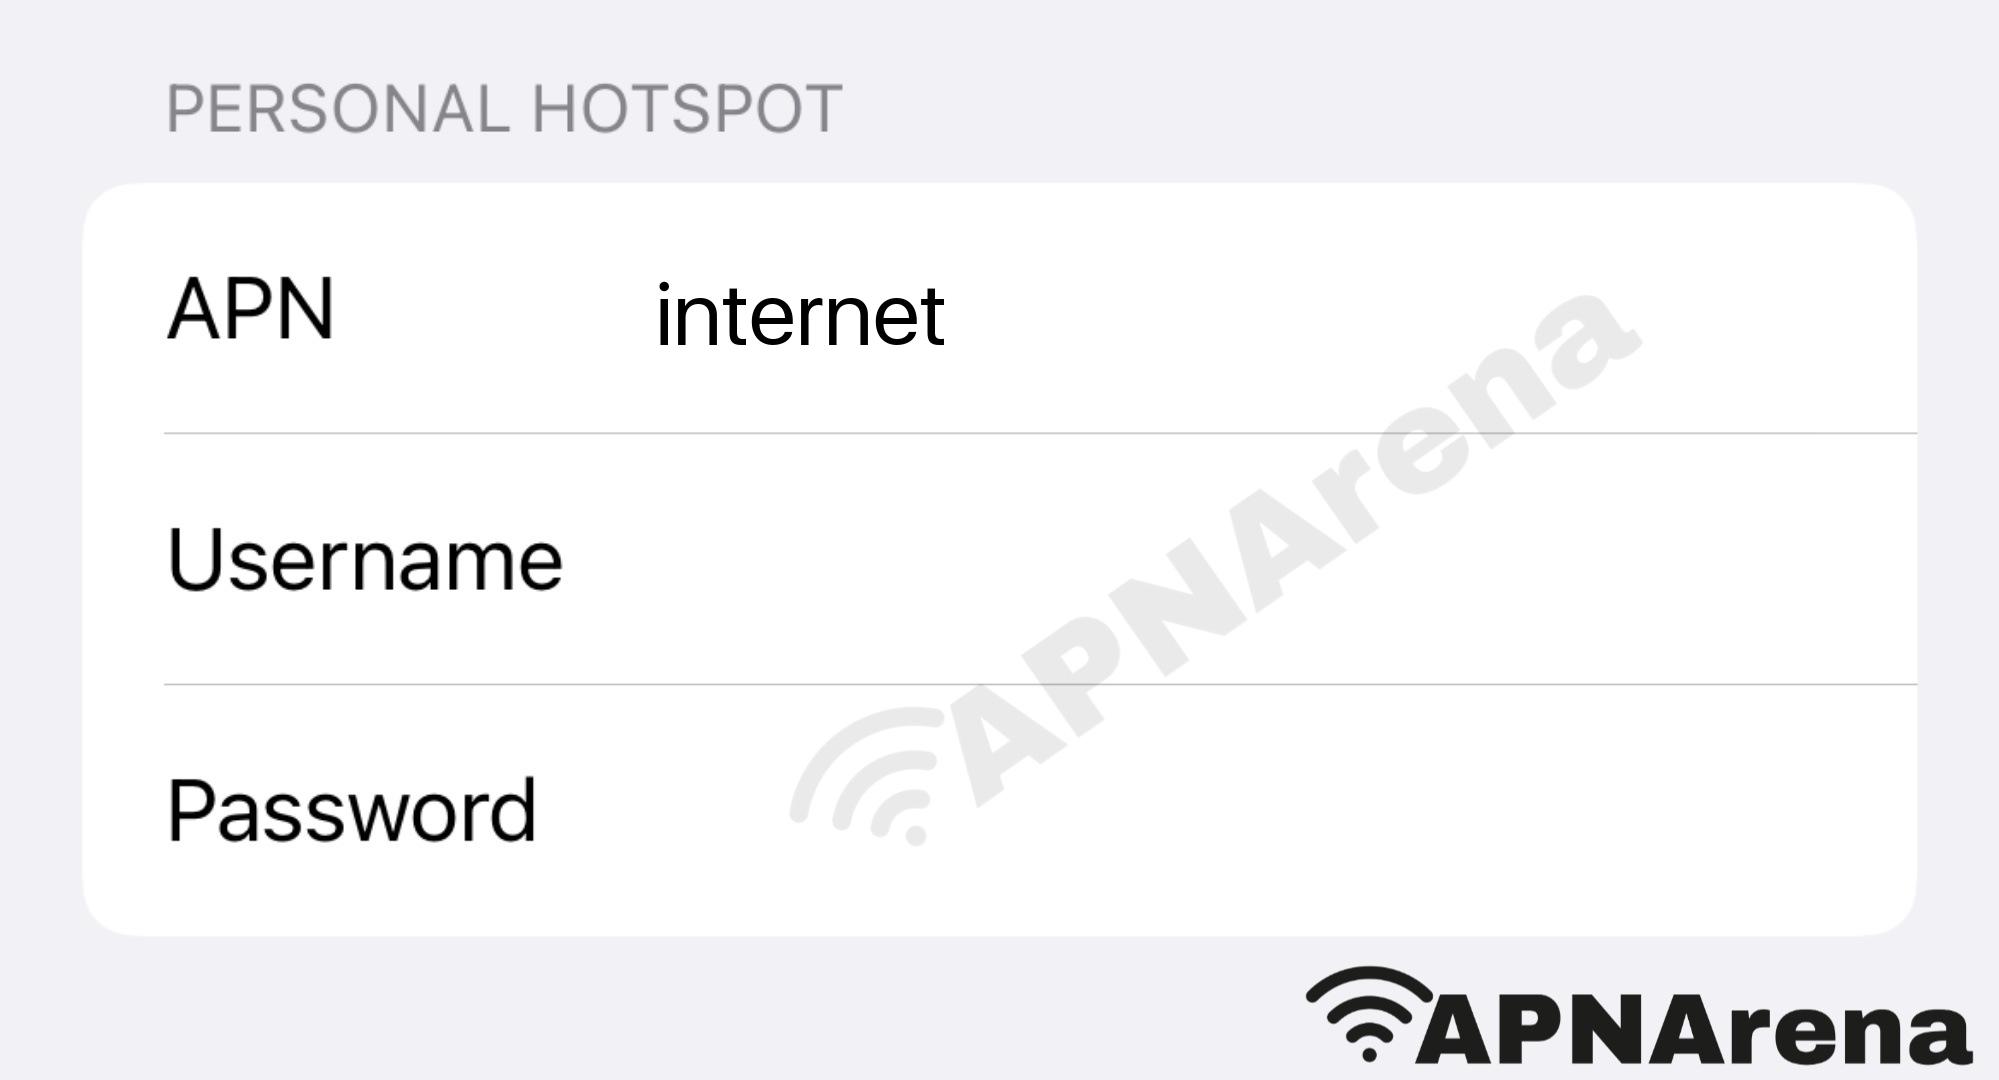 Touch Mobile Philippines Personal Hotspot Settings for iPhone